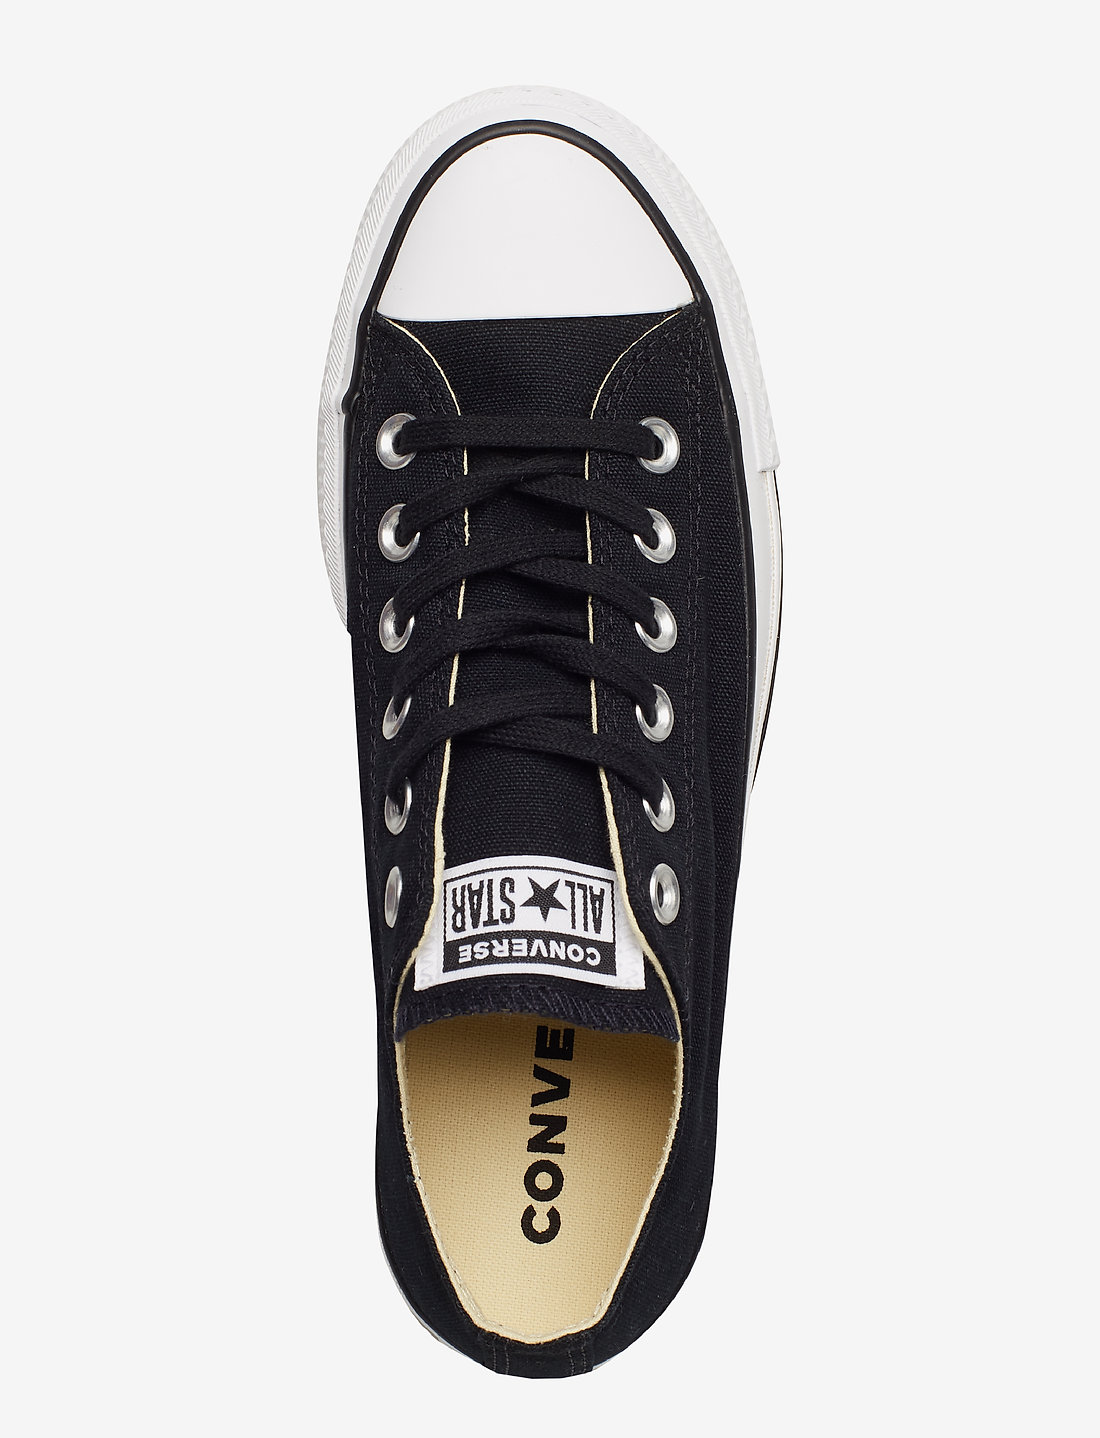 Converse Taylor All Star Lift Lave sneakers - Boozt.com